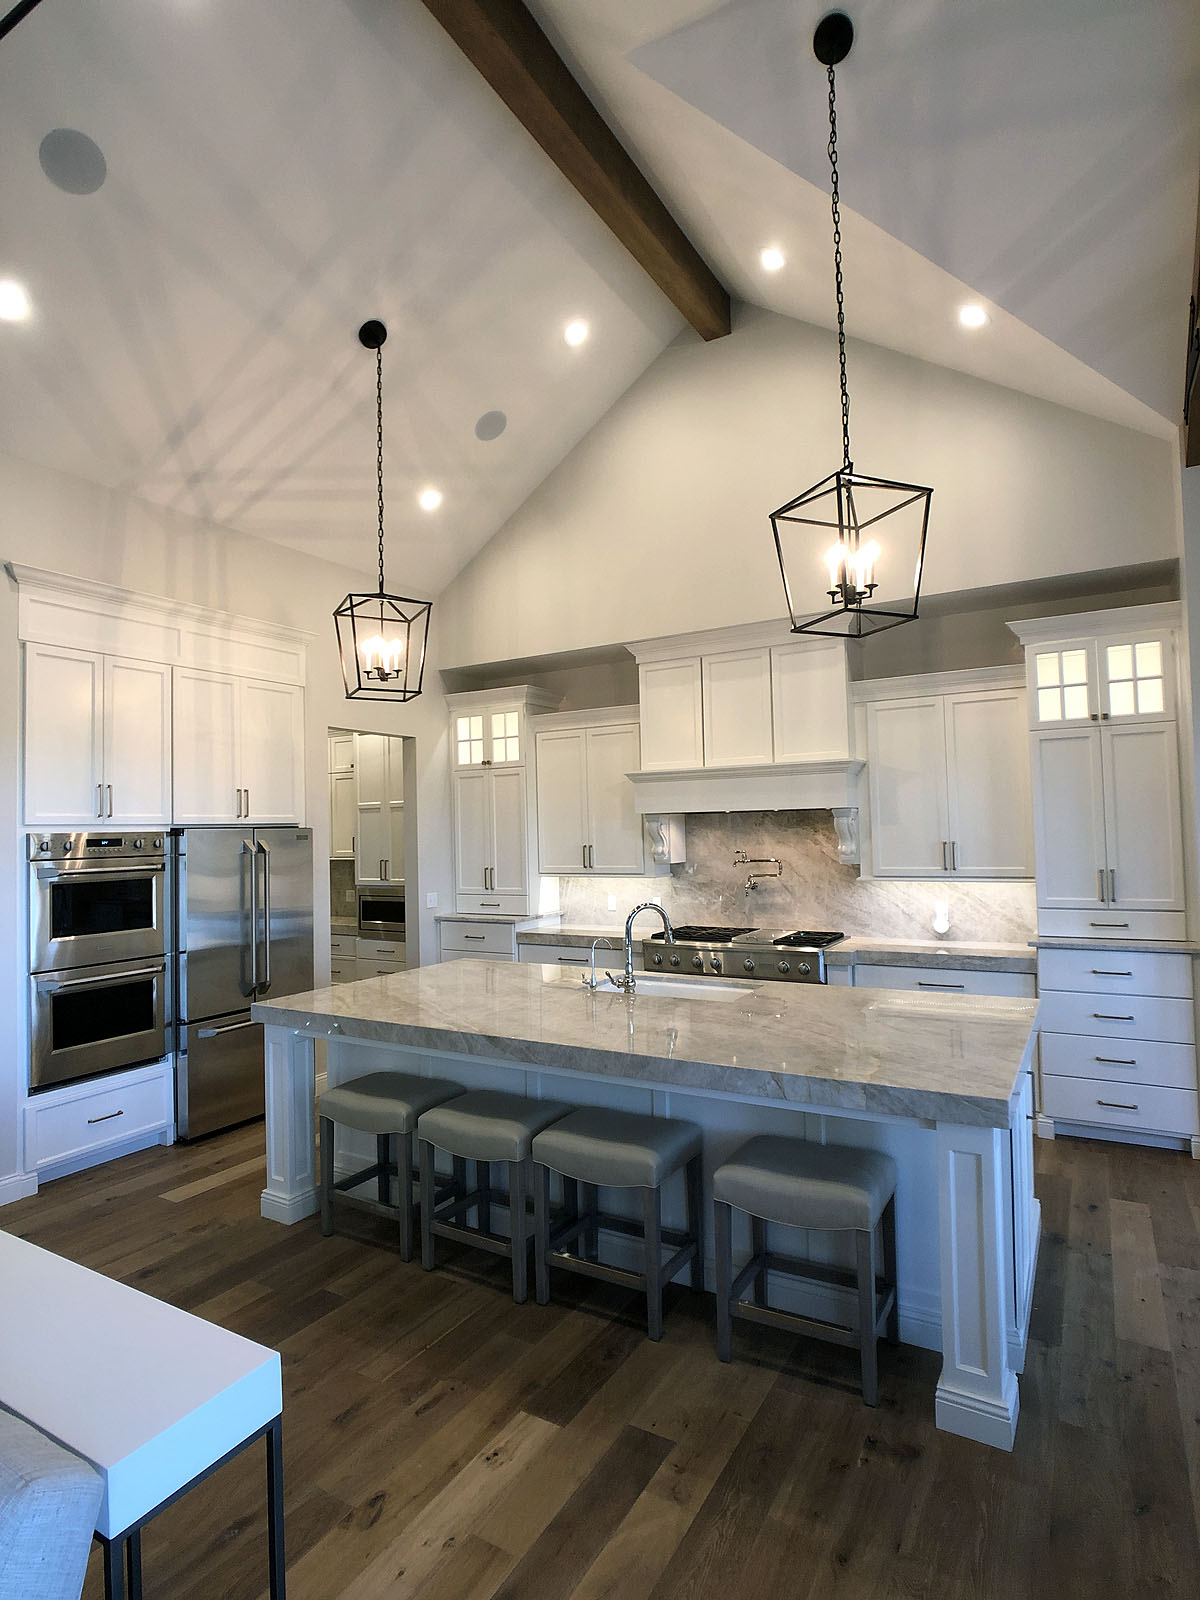 kitchens1 | Custom Homes by Tompkins Construction
